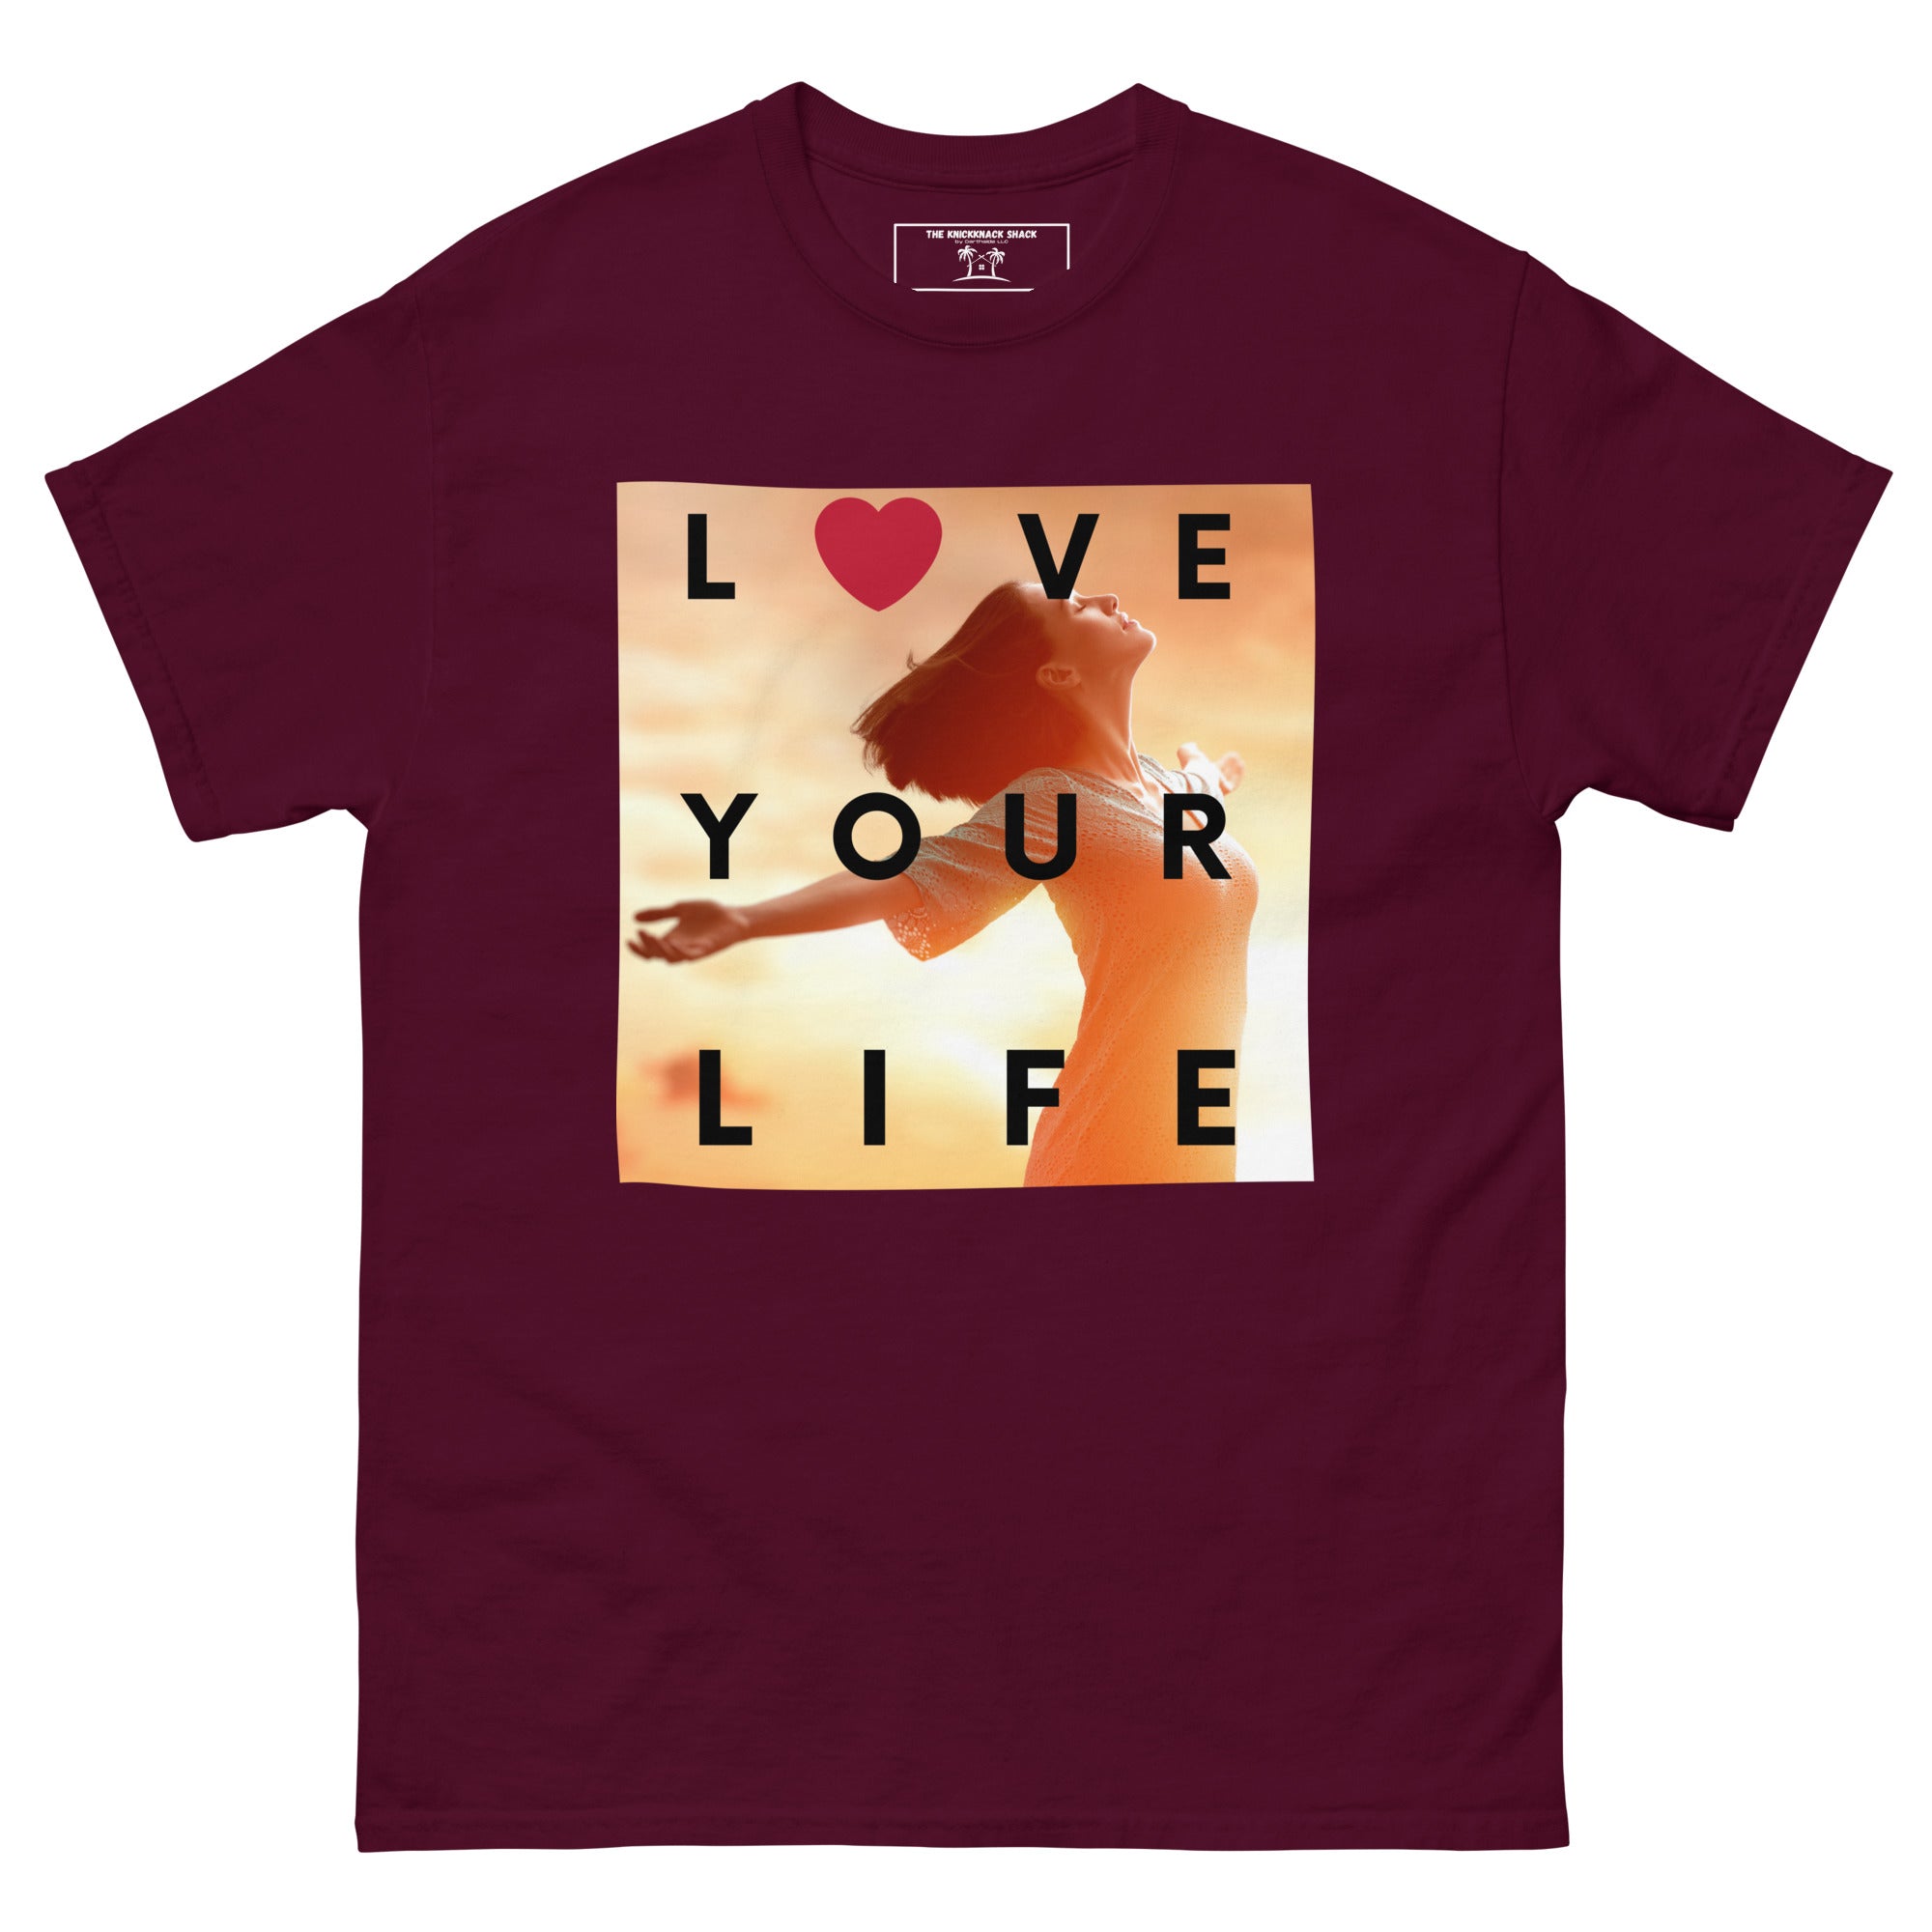 Classic Tee - Love Your Life (Dark Colors)